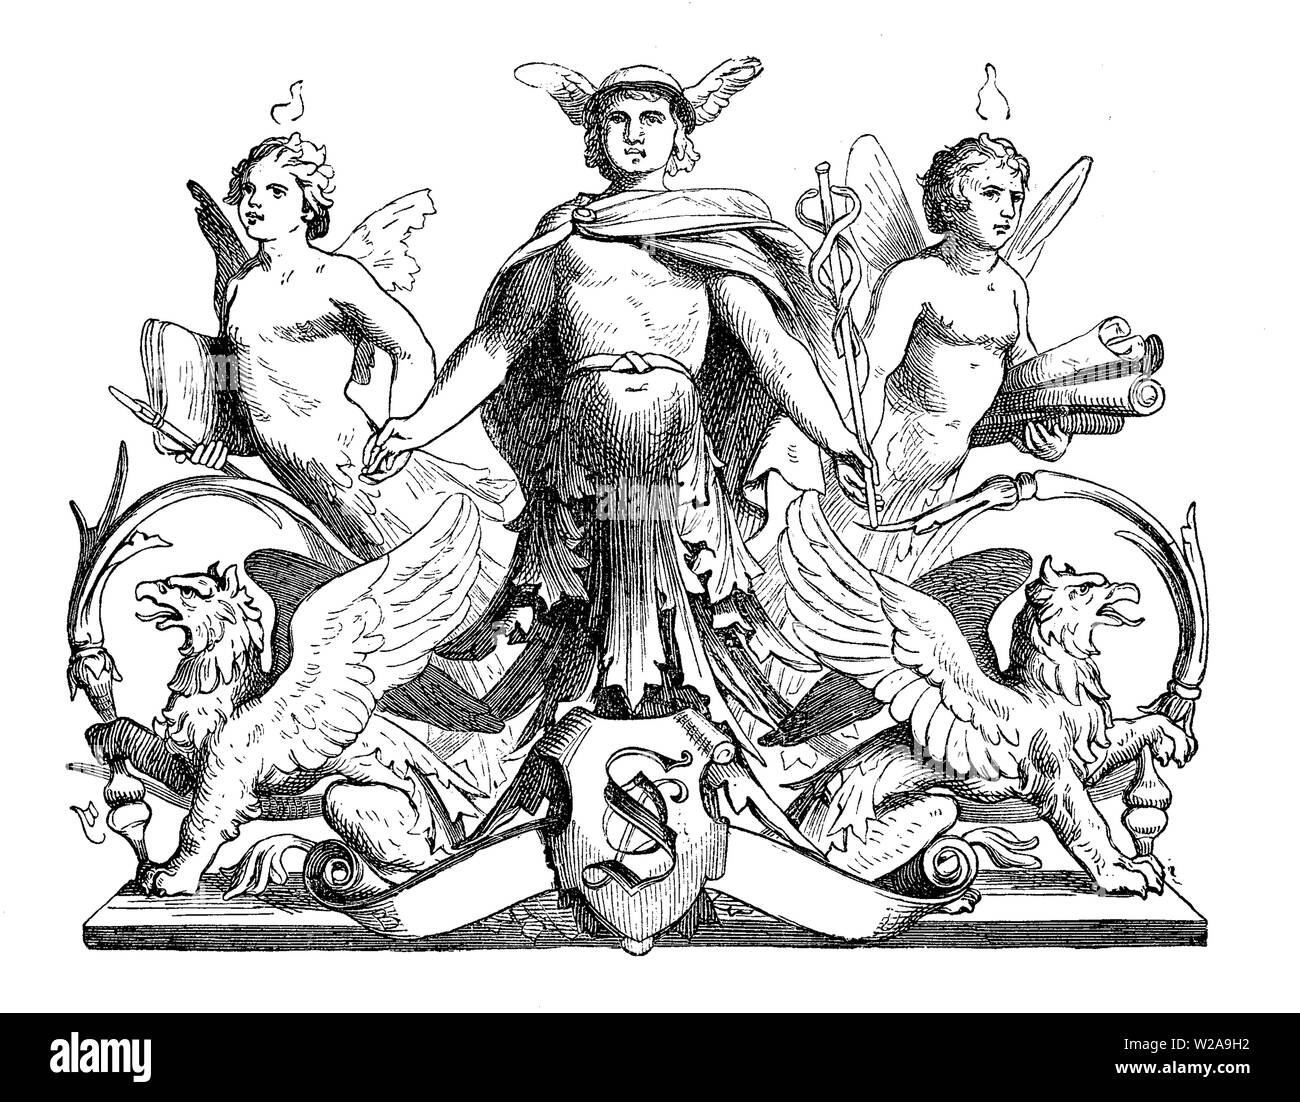 Typographical chapter decoration with mythological figures: Hermes the god of commerce and griffins Stock Photo